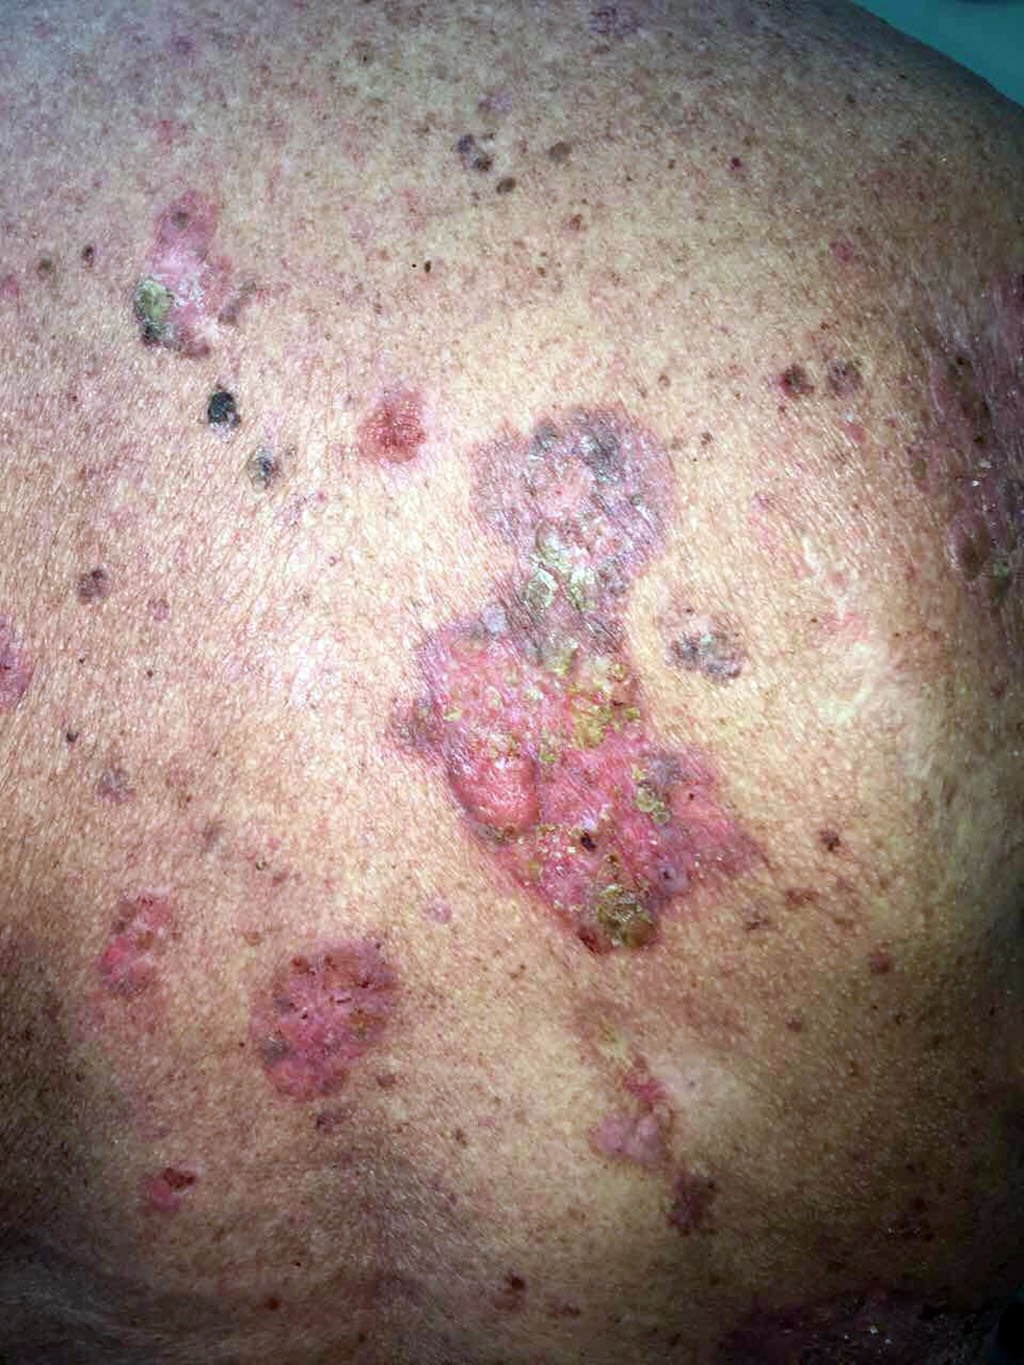 Figure 3. Spots, plaques, nodes on the skin of the back